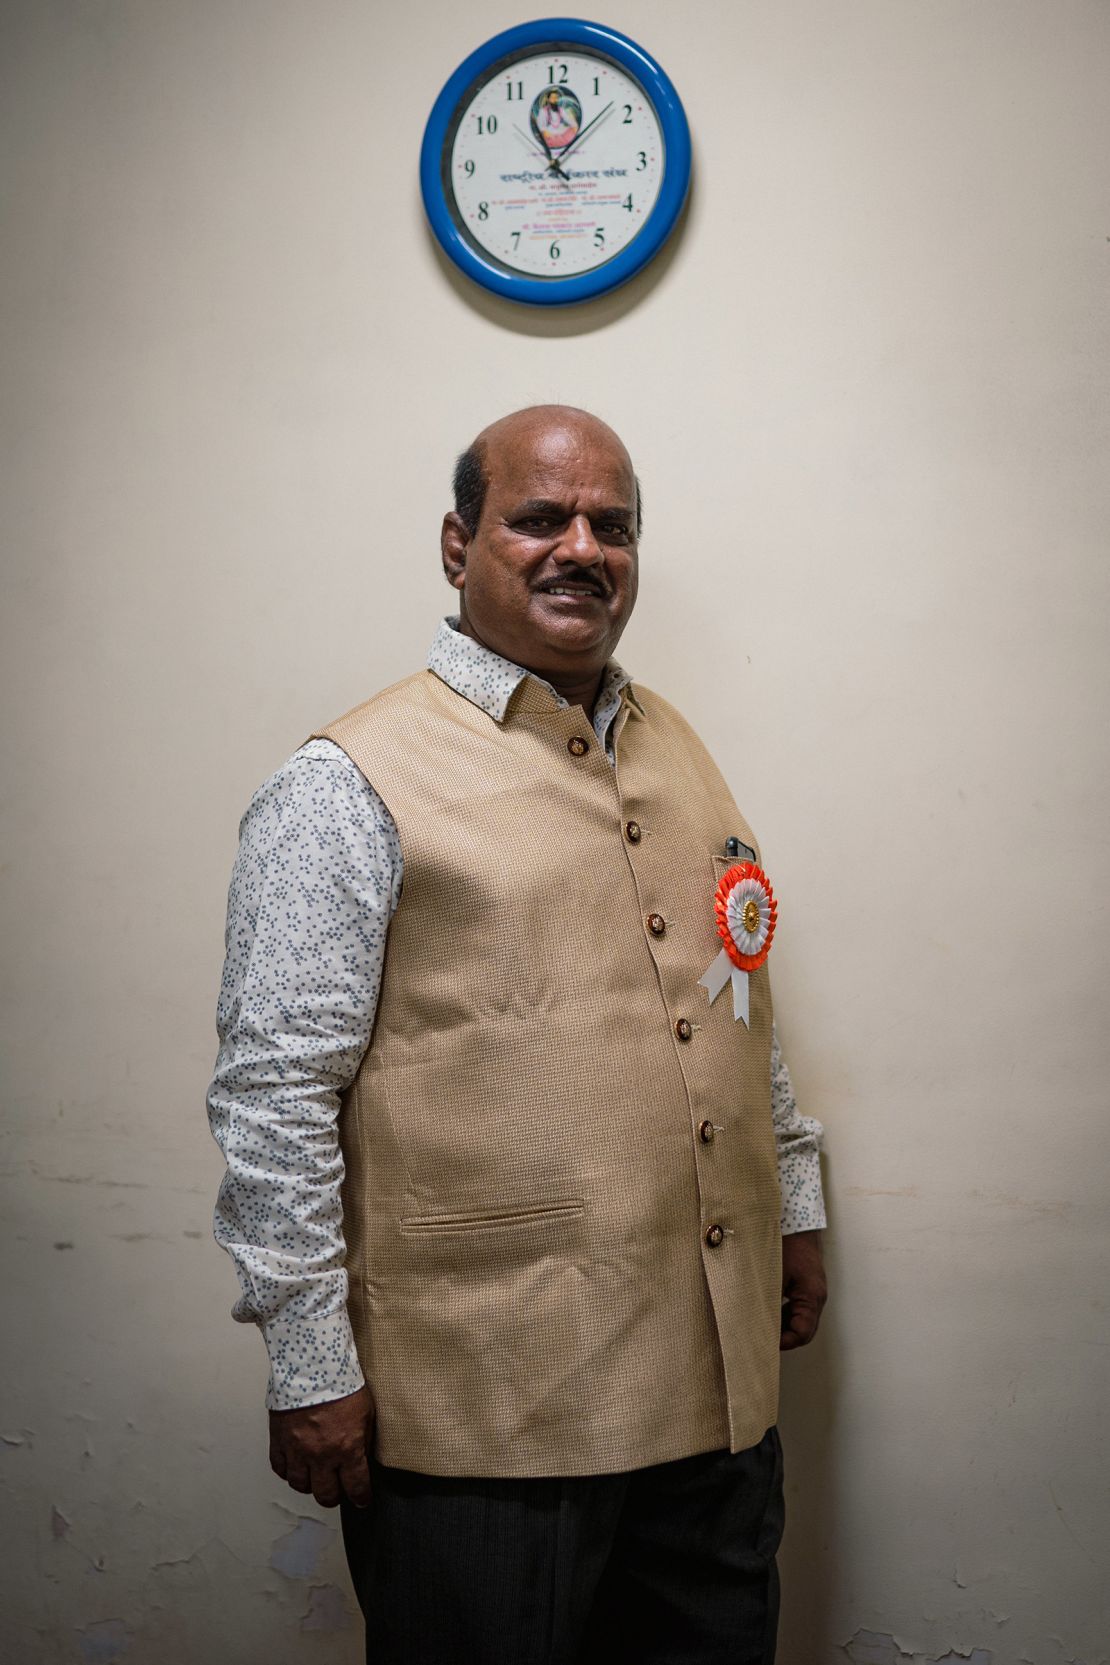 Dilip Gabekar, 60, poses for a picture during an interview with CNN at Manohar Joshi College in Dharavi on April 14.